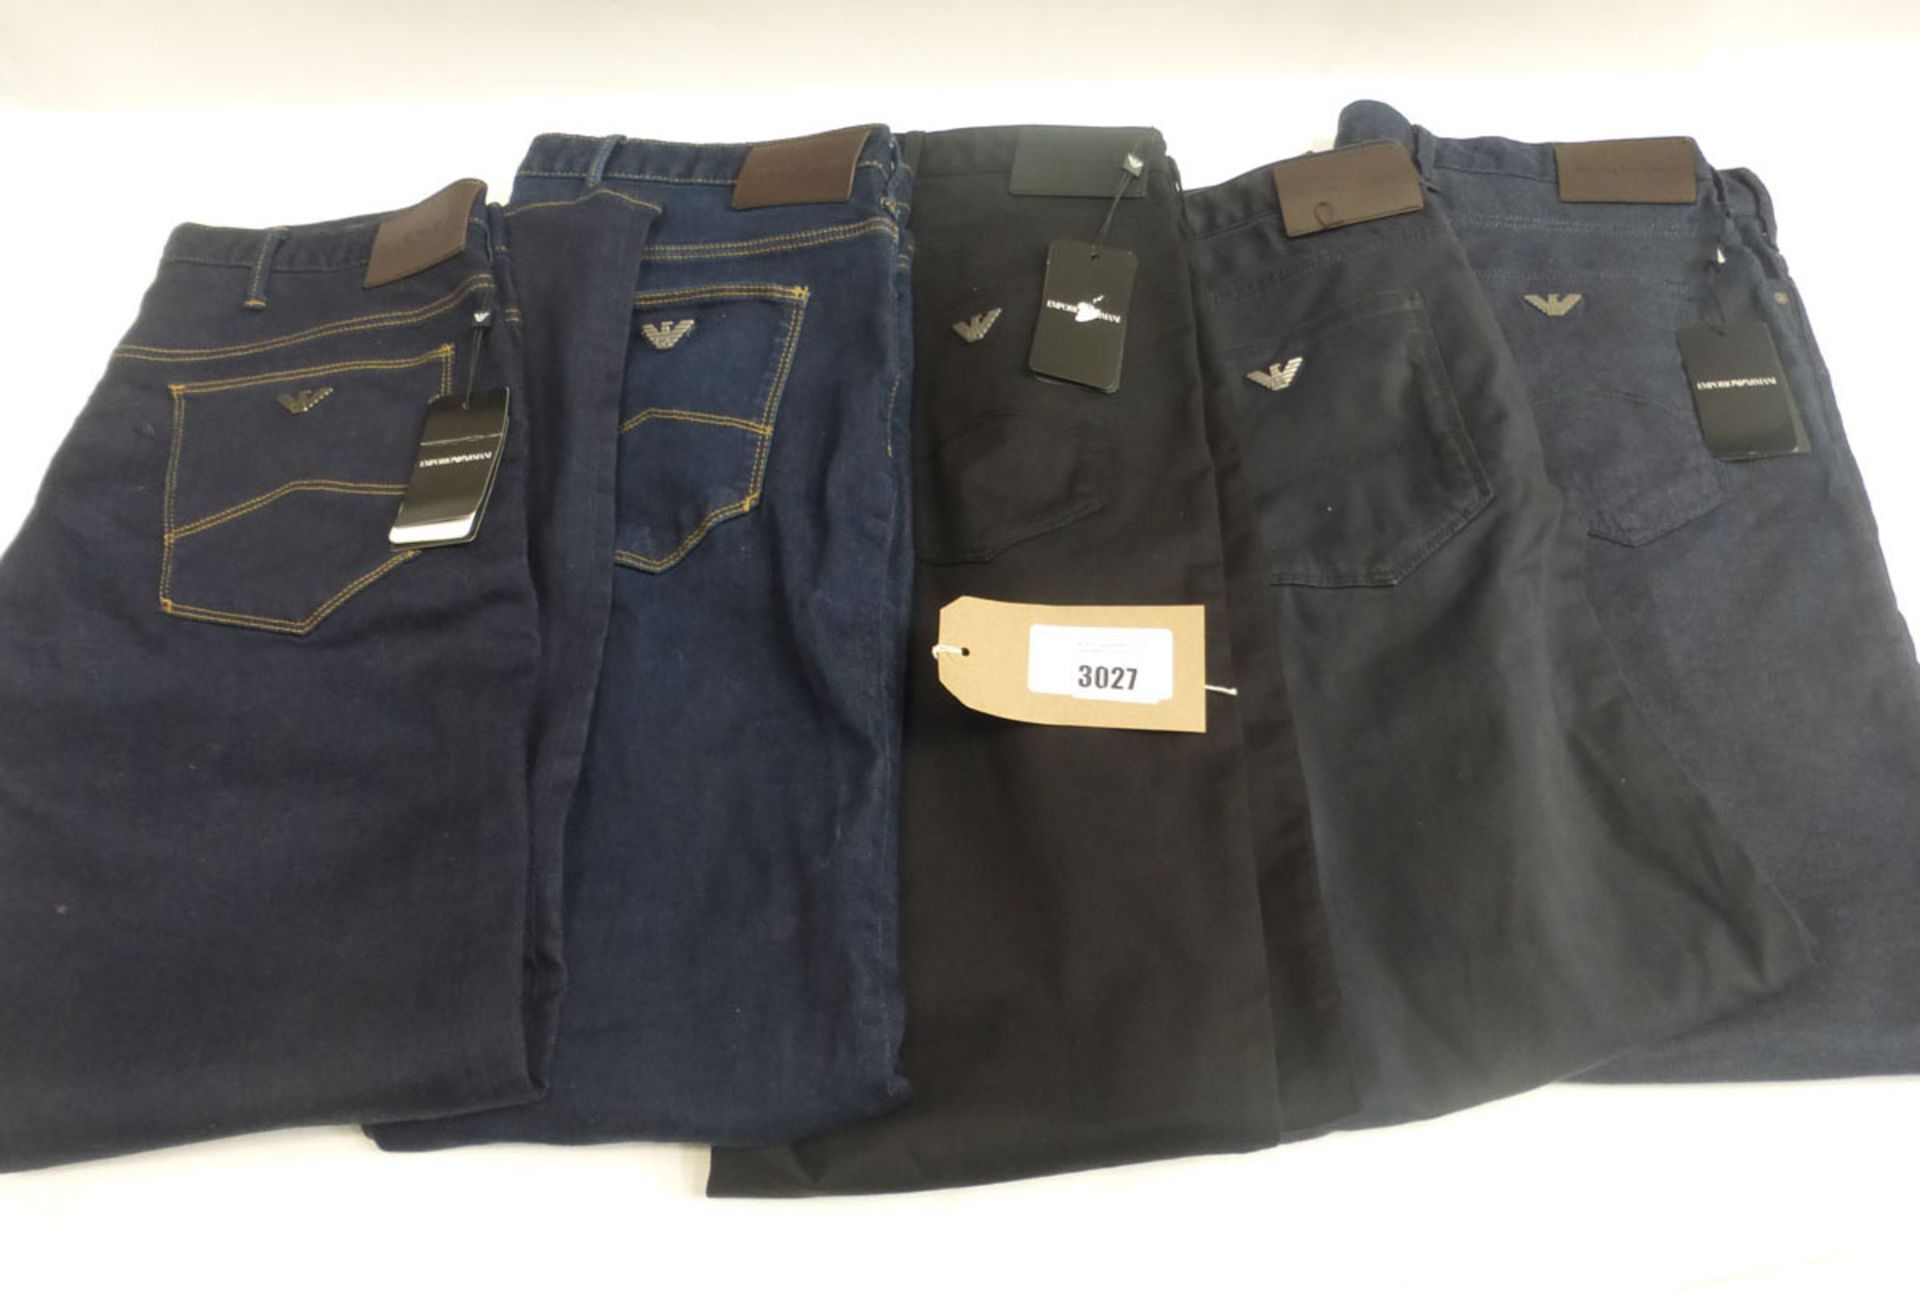 5 pairs of gents Armani jeans - 3 tagged and 2 untagged. Used